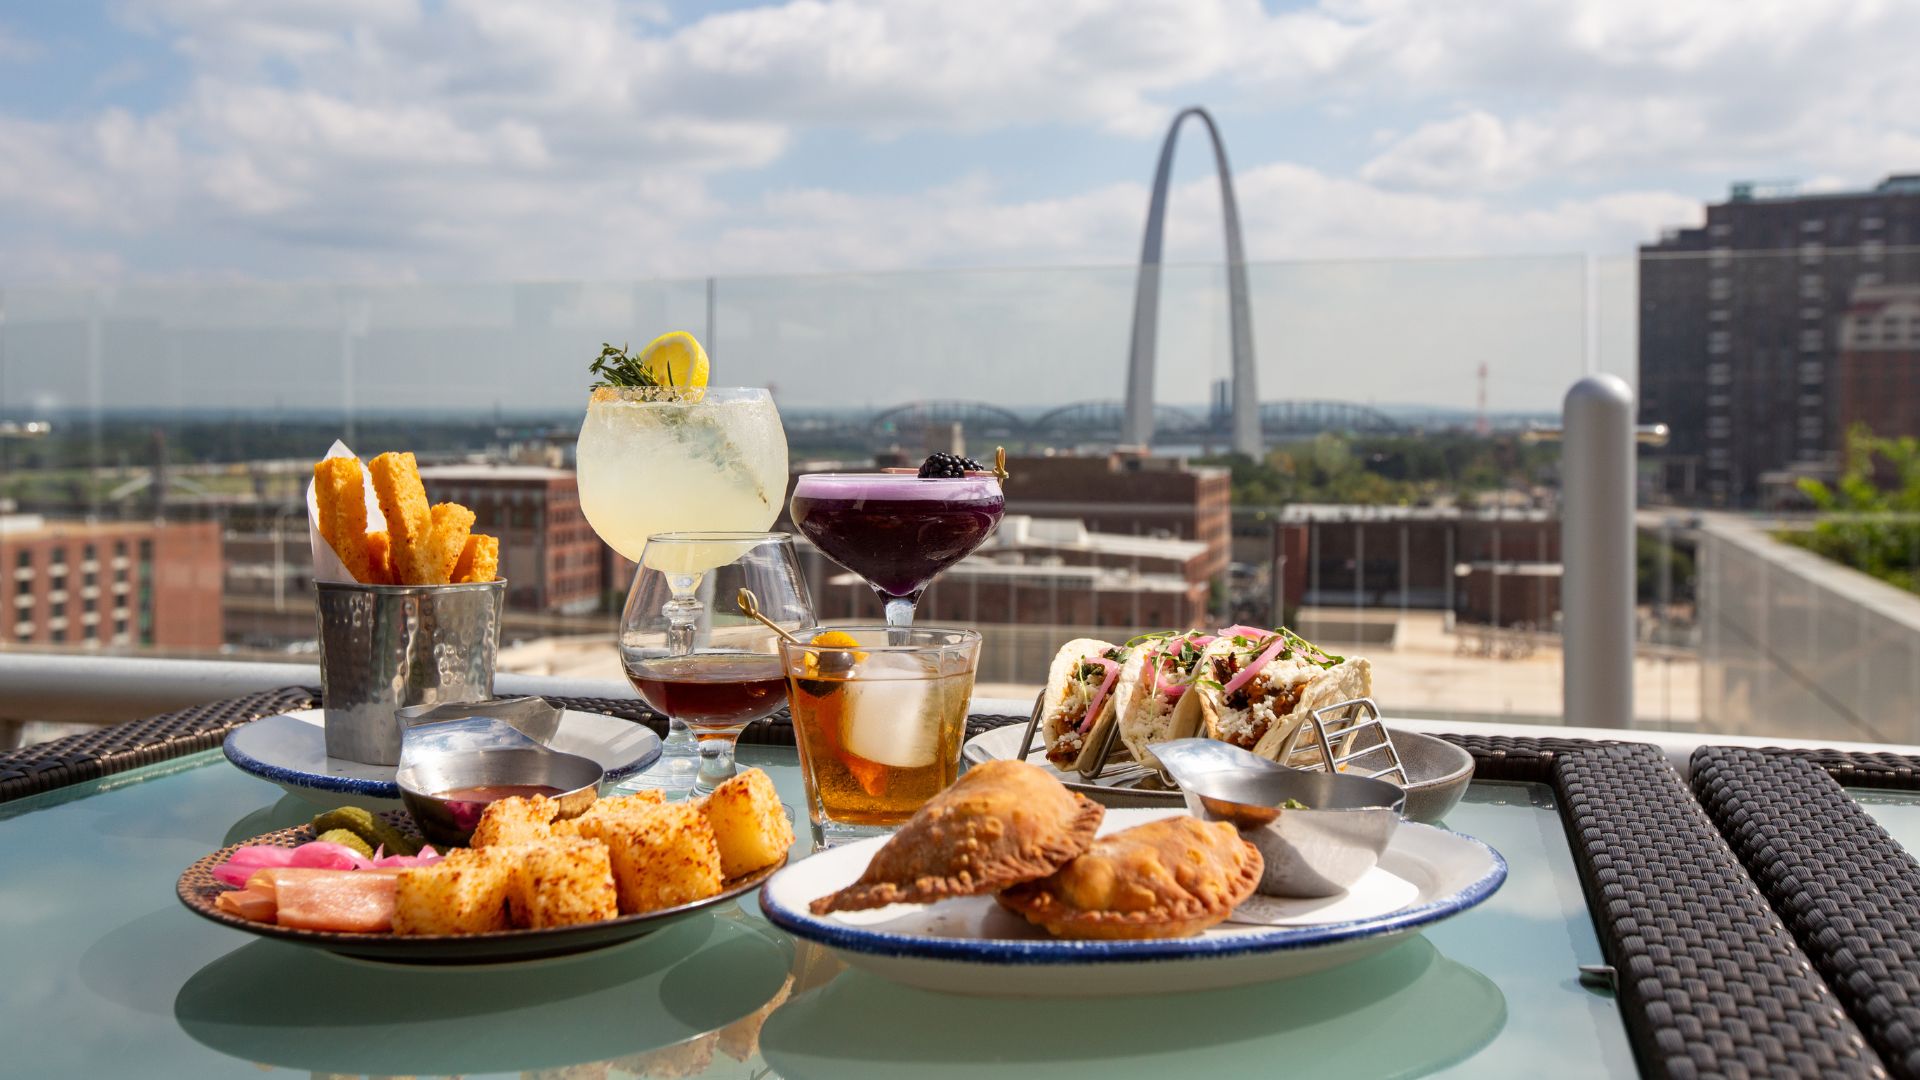 The rooftop bar at the Four Seasons Hotel St. Louis offers elevated food and drinks along with five-star views of the Gateway Arch.